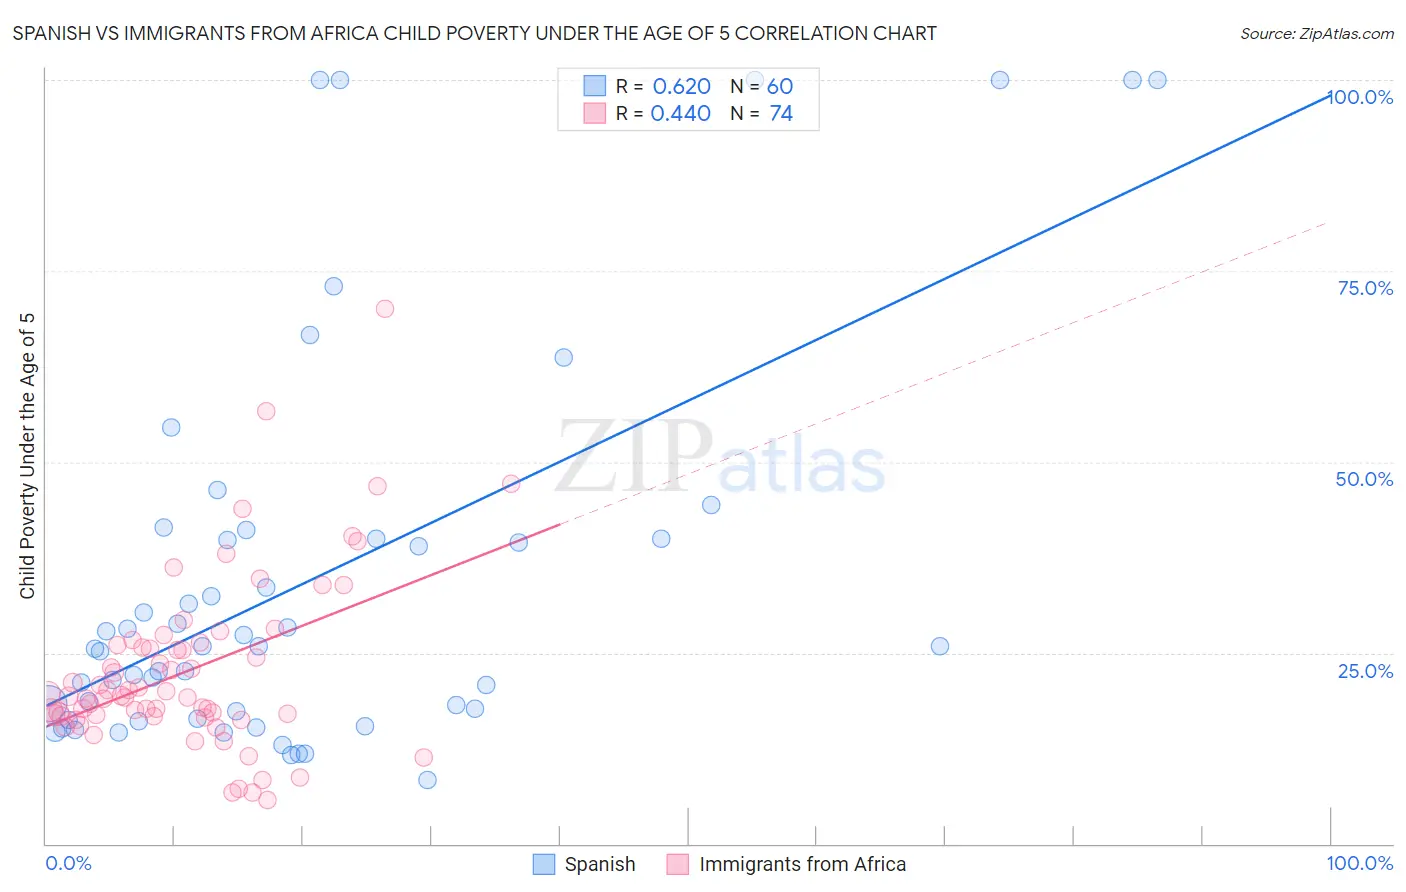 Spanish vs Immigrants from Africa Child Poverty Under the Age of 5